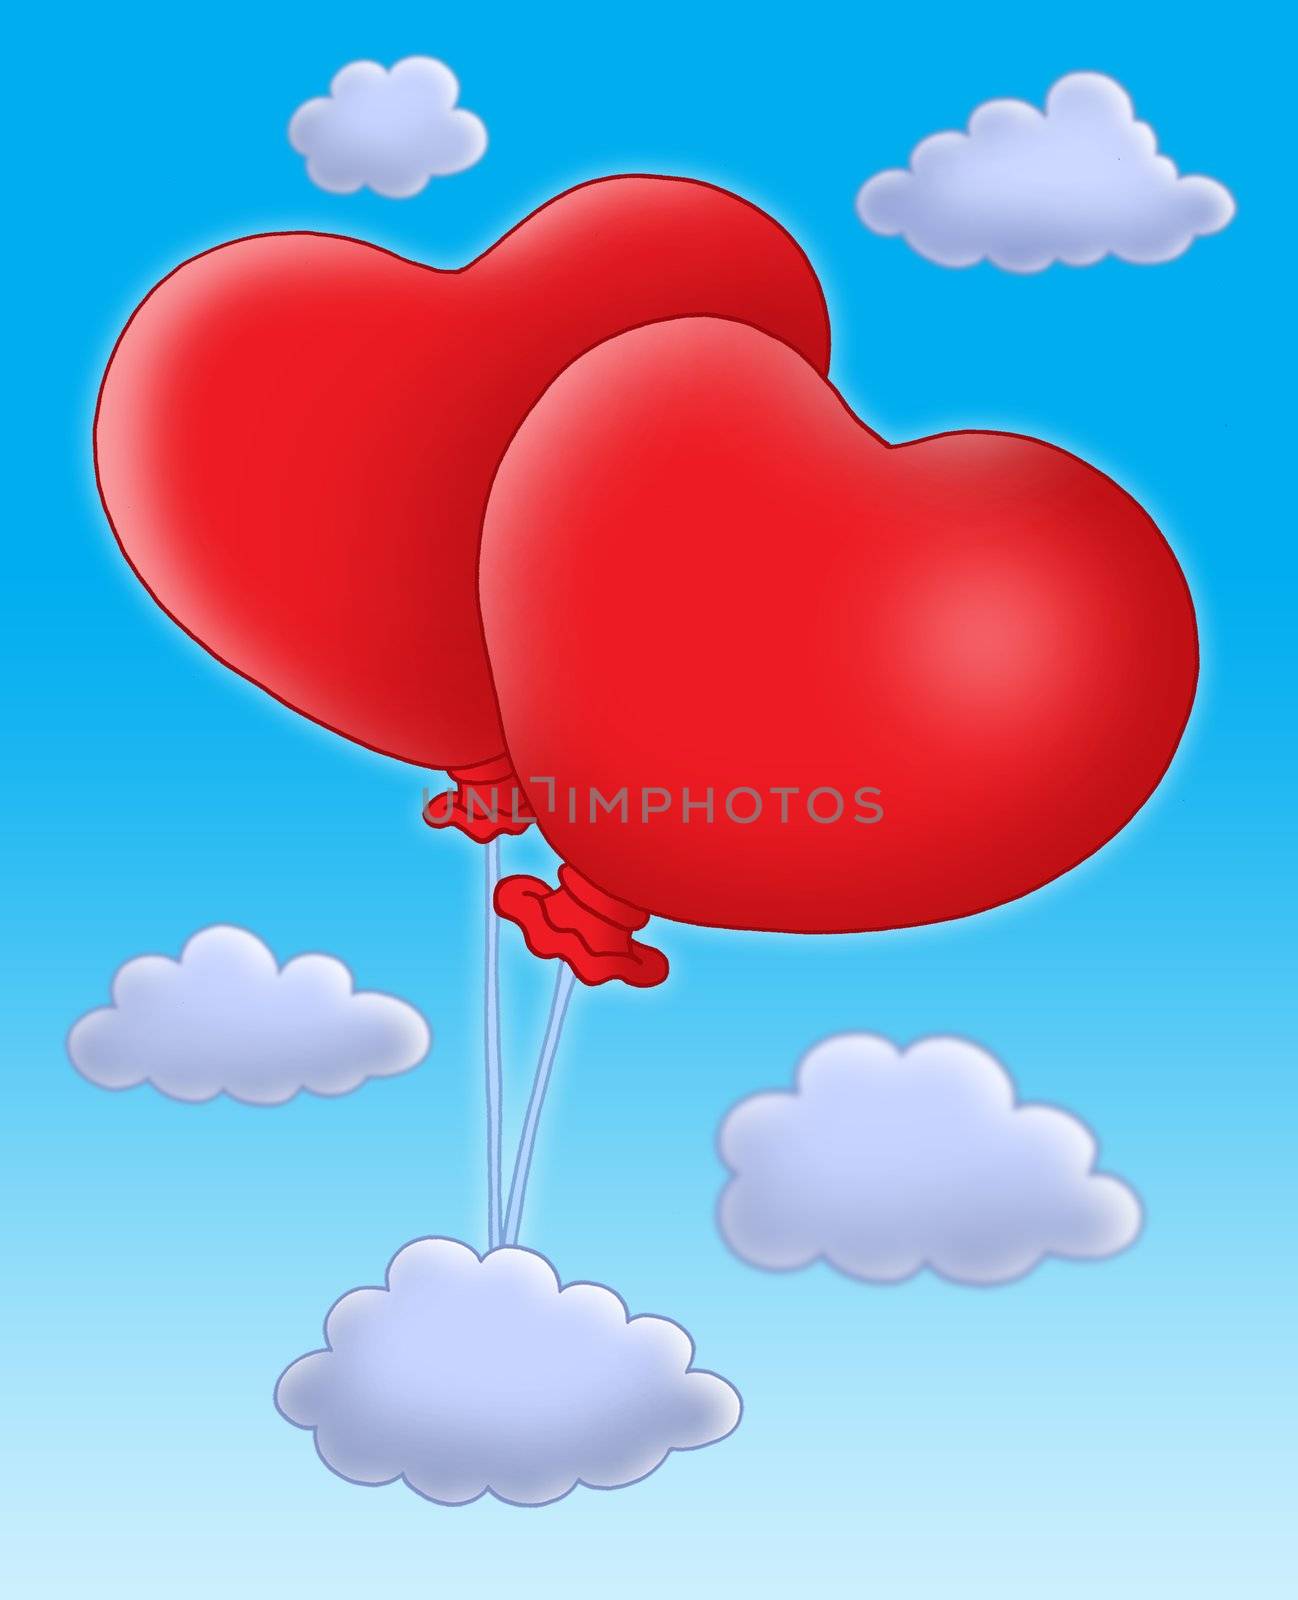 Color illustration of two ballons-hearts on blue sky.